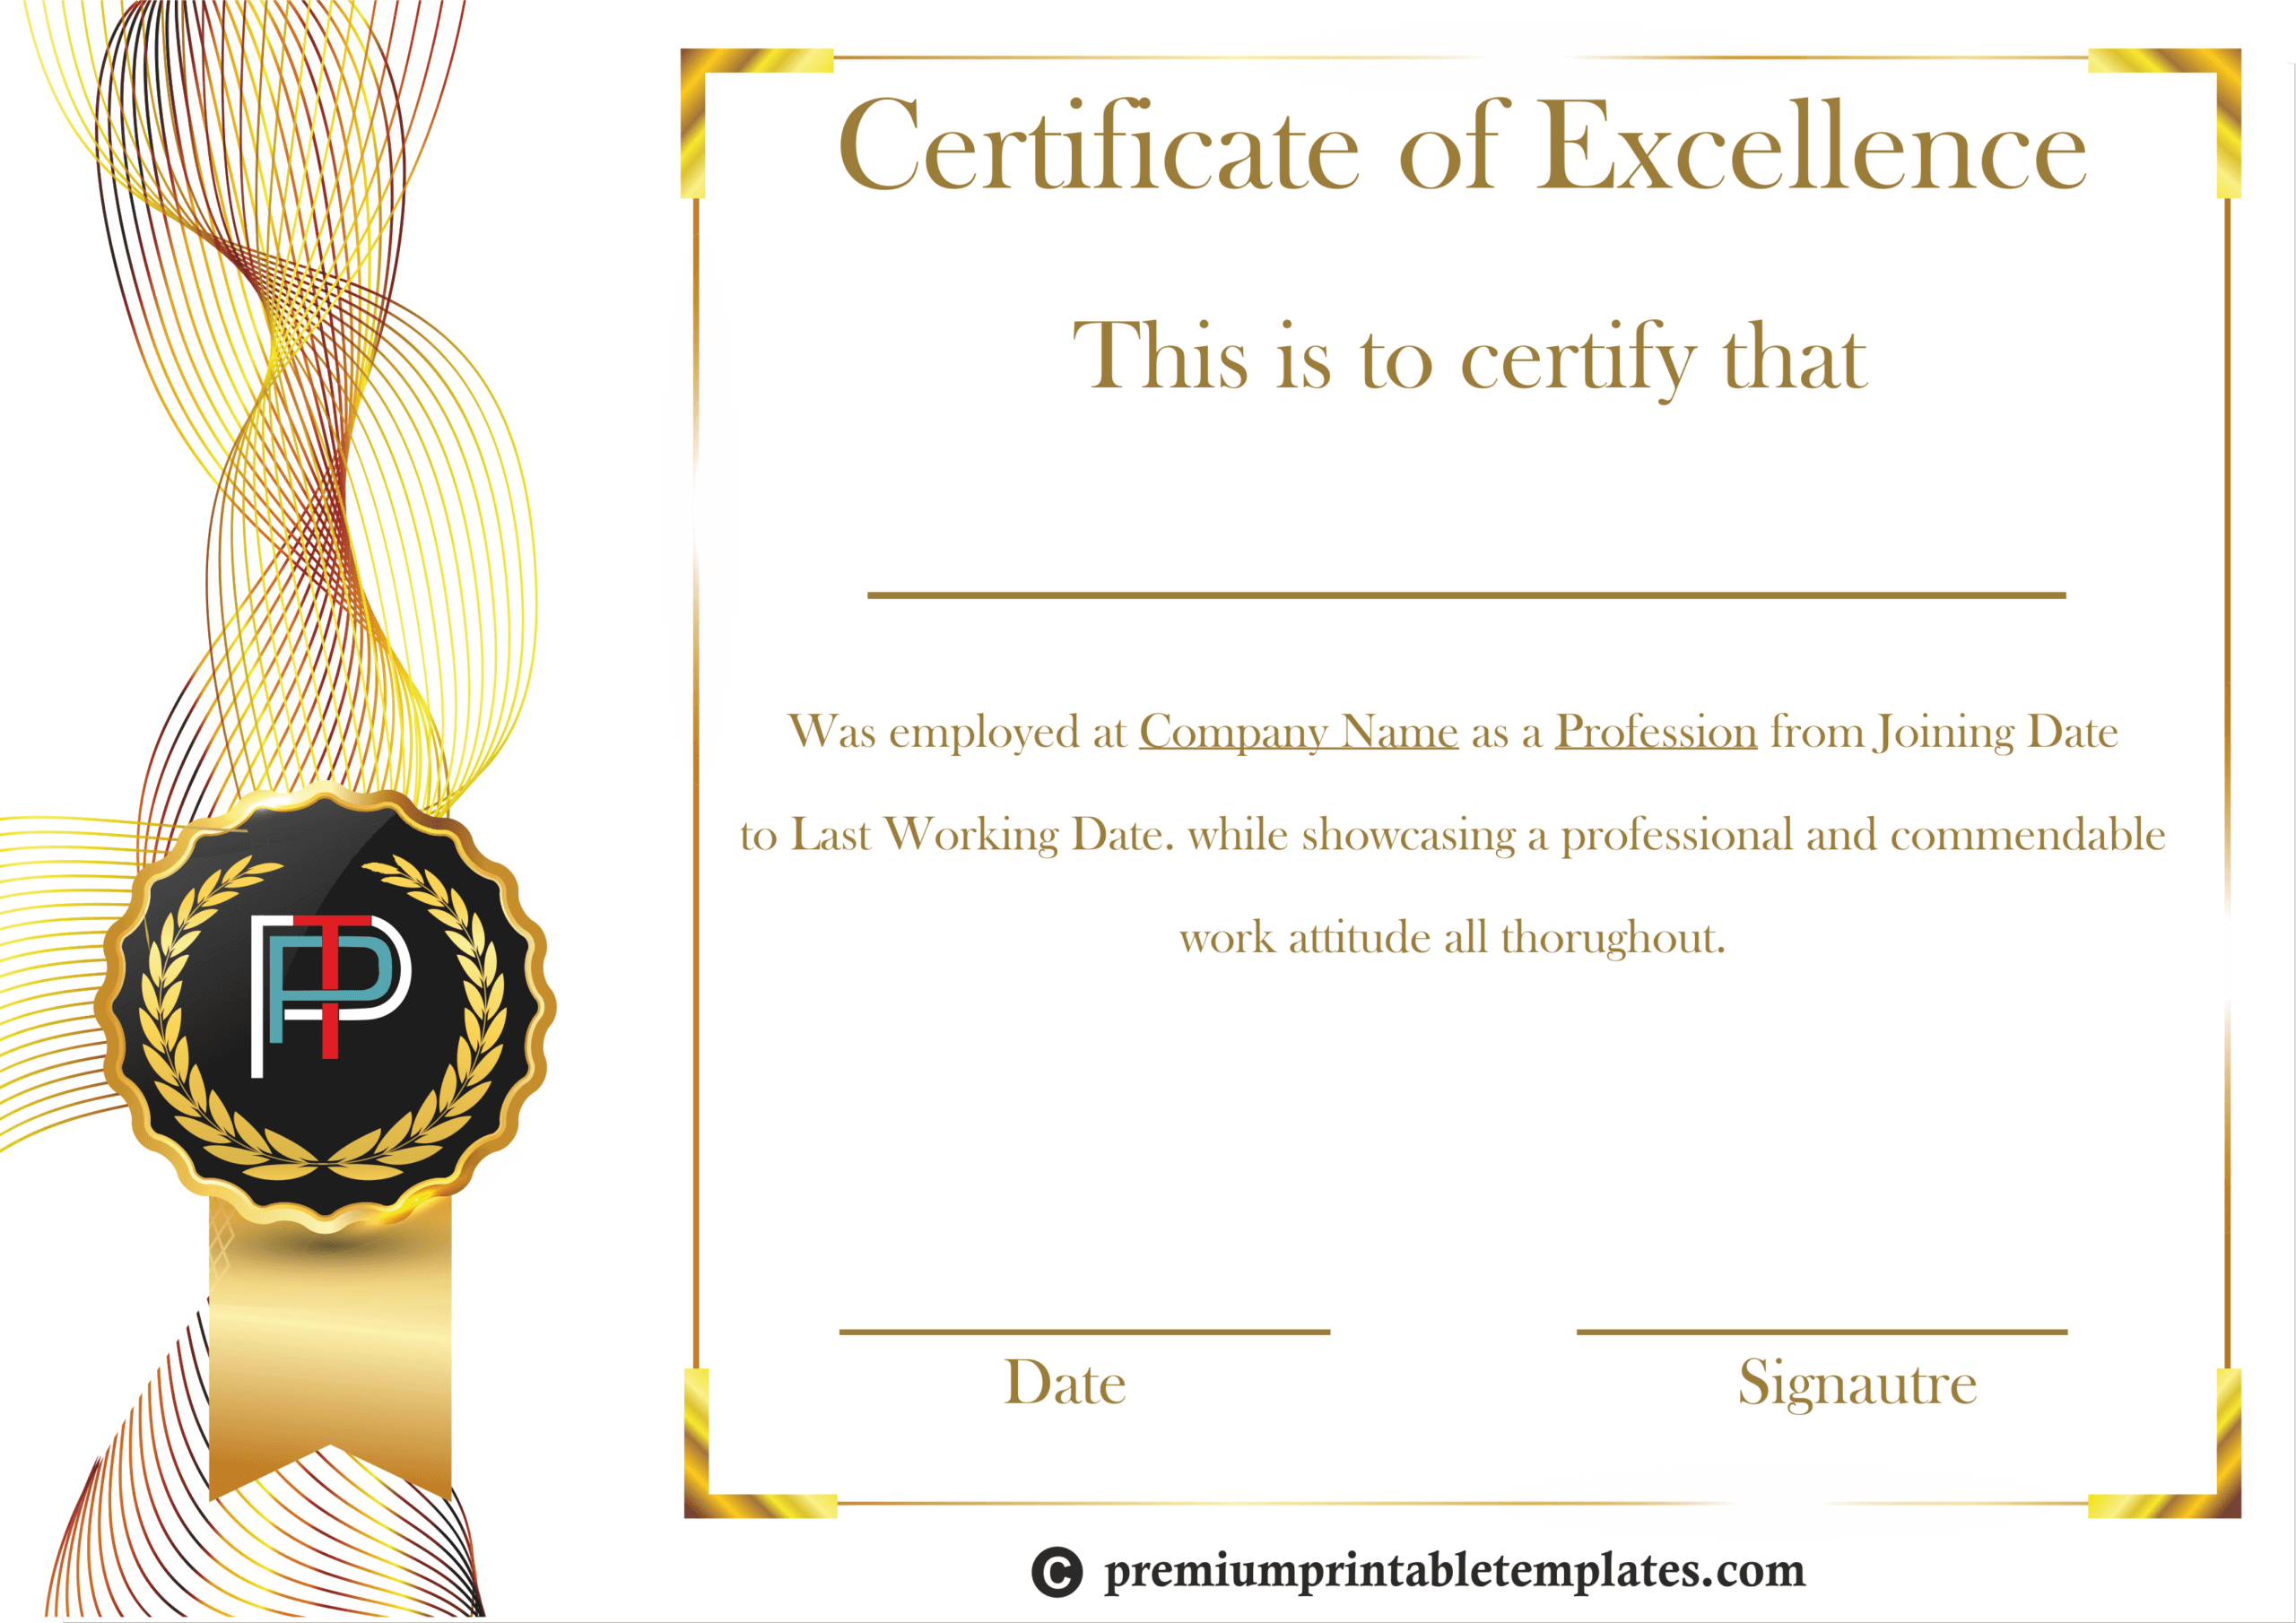 Certificate Of Excellence Template | Certificate Templates With Best Performance Certificate Template